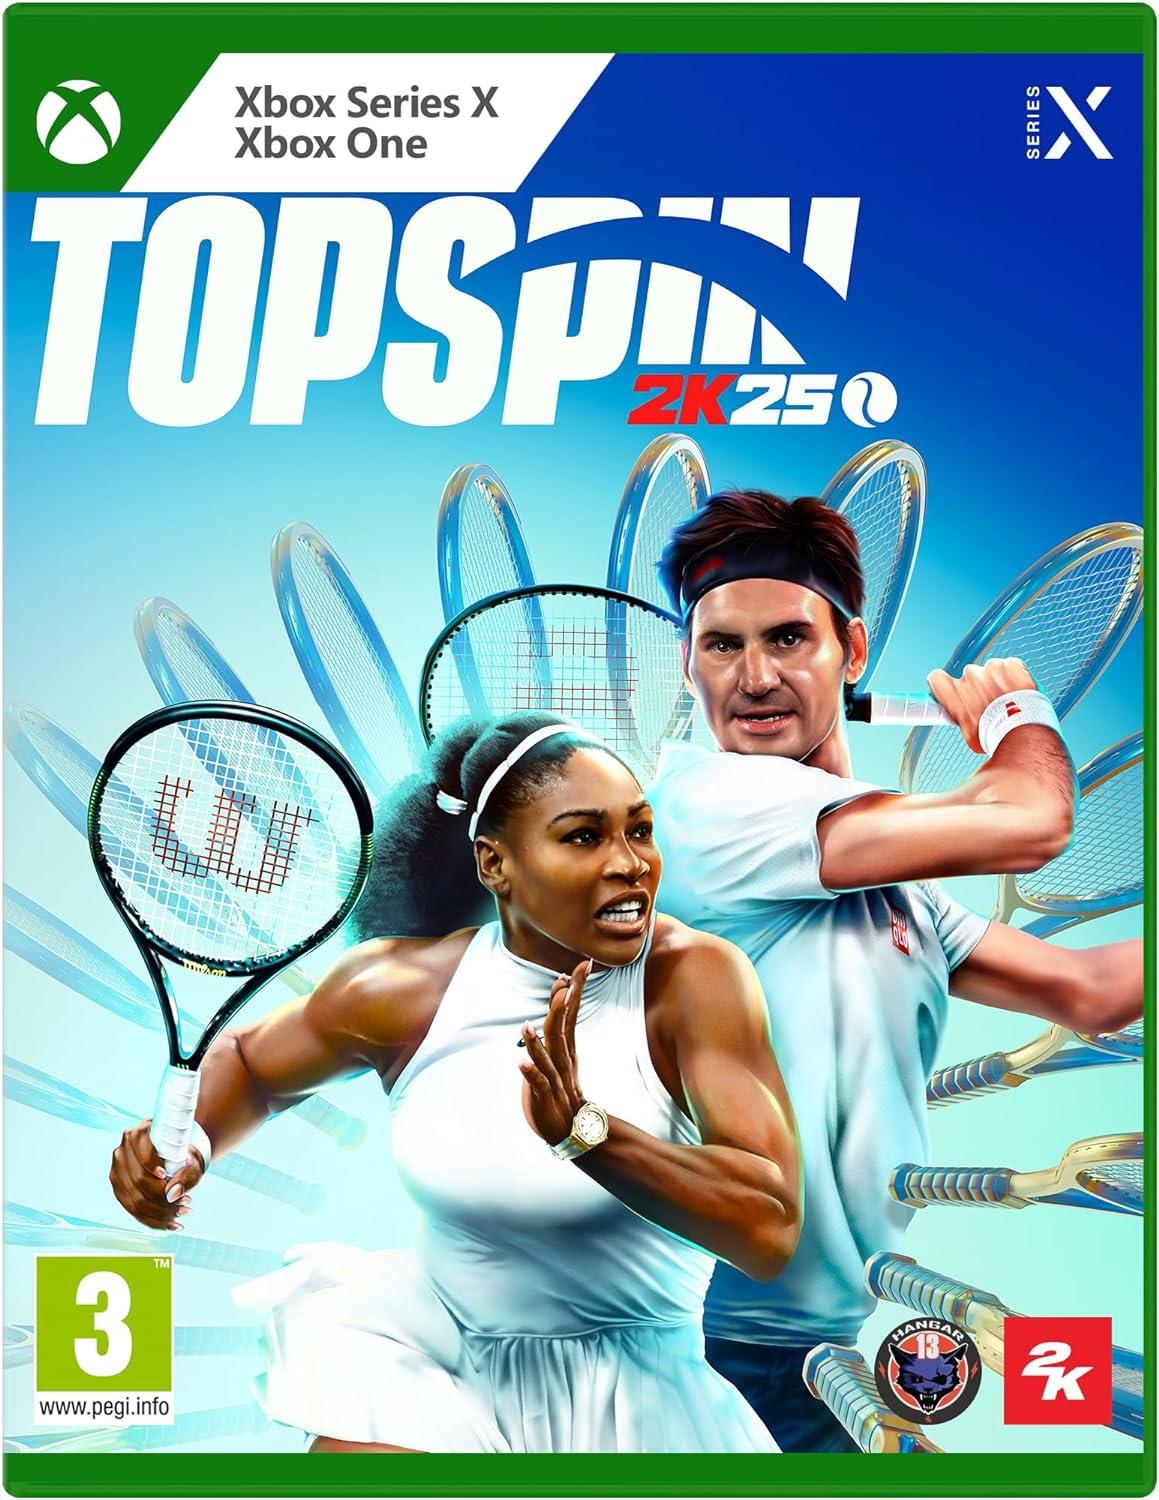 TopSpin 2K25 Xbox Series X/1 Game